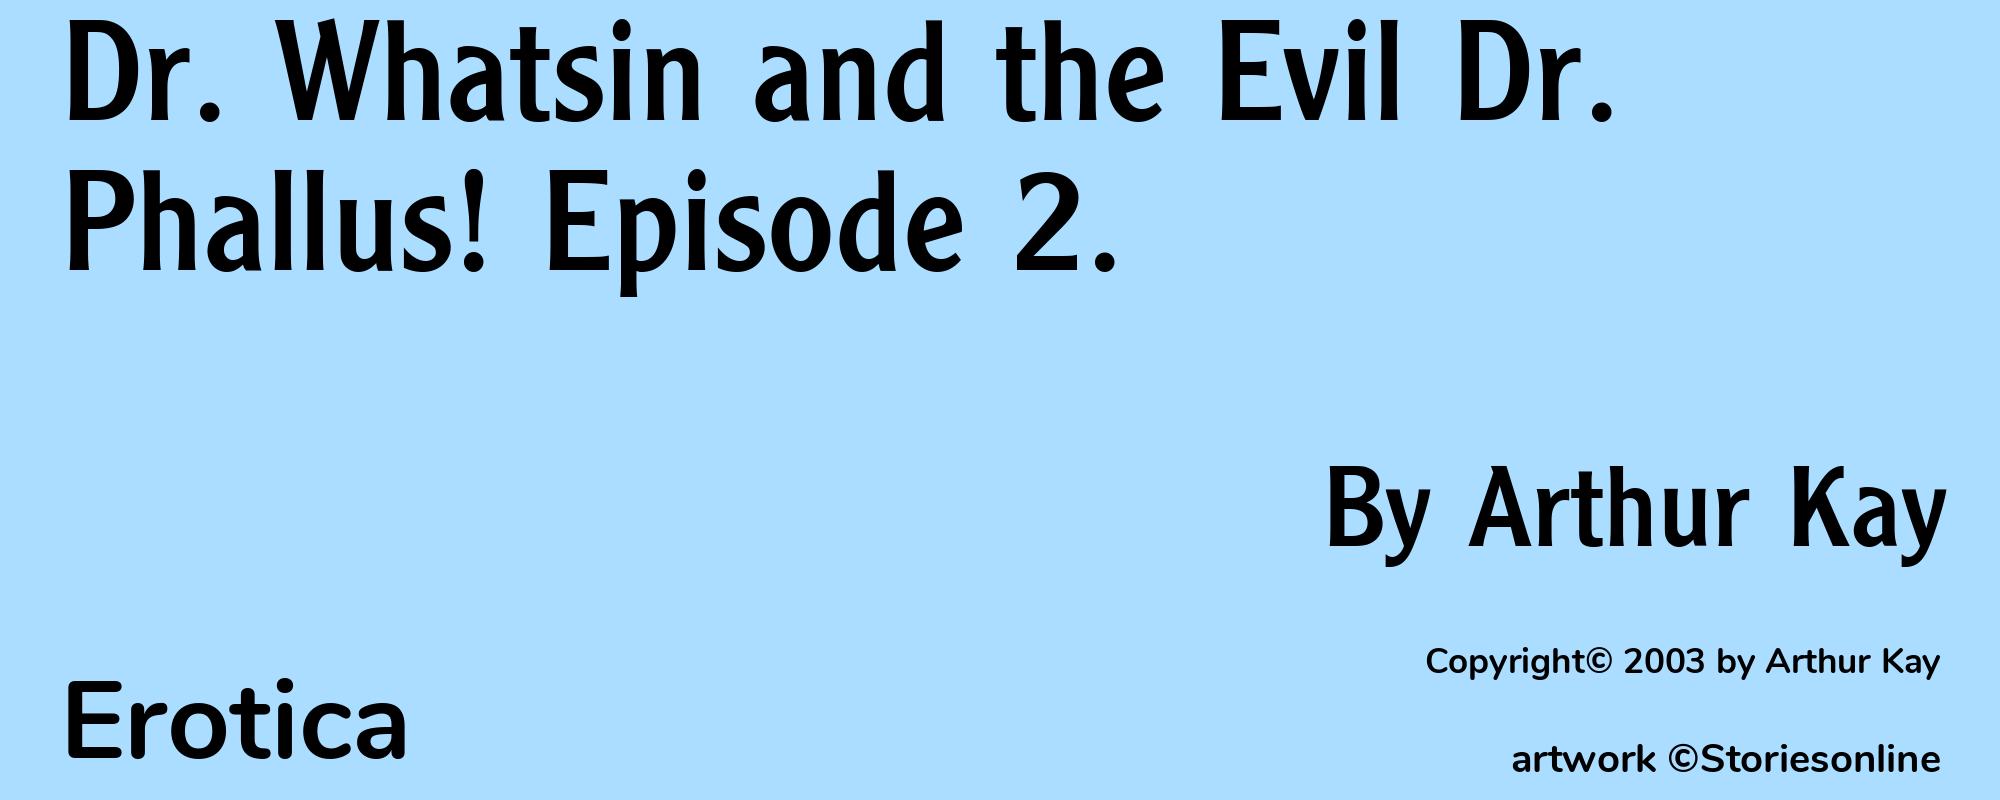 Dr. Whatsin and the Evil Dr. Phallus! Episode 2. - Cover